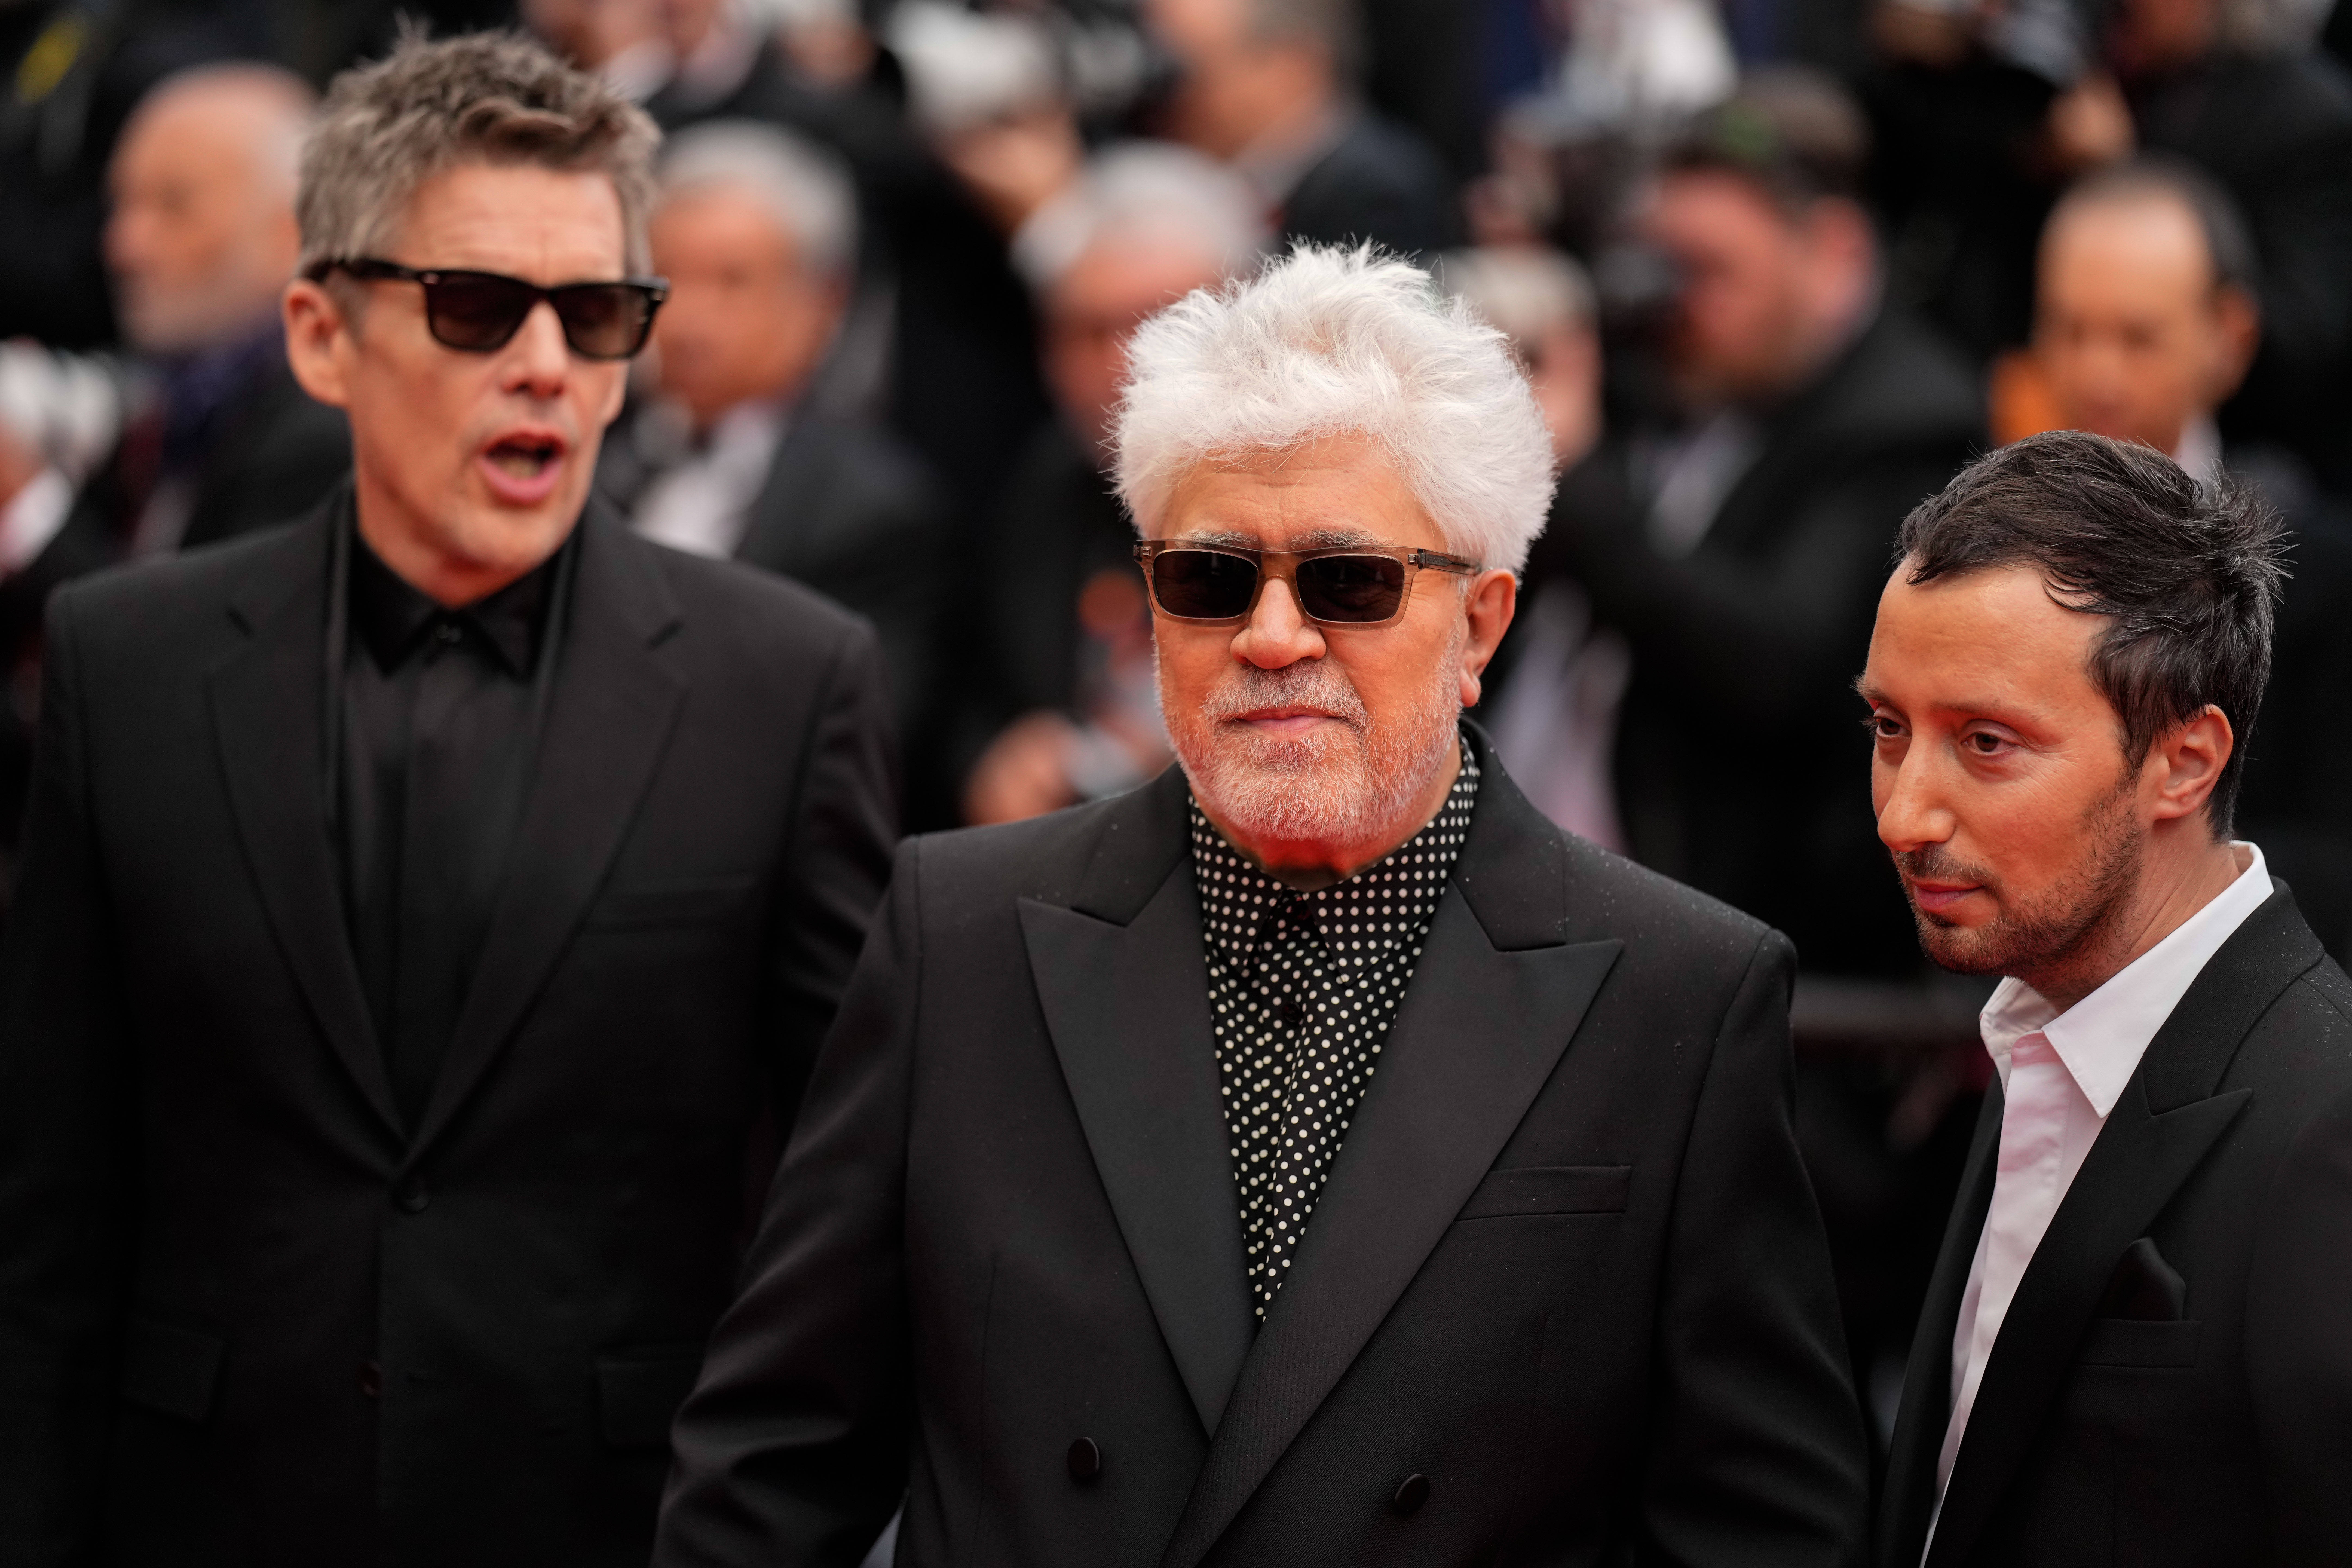 The Kaibutsu Monster Movie Premiere at the 76th Edition of the Cannes Film Festival Ethan Hawke, Pedro Almodovar, and Anthony Vaccarello attend the movie premiere and red carpet event for the movie Kaibutsu Monster, which is in competition for the Palme d Or, during the 76th edition of the Cannes Film Festival on May 17 2023, in Cannes, France Cannes Palace of Festivals and Congresses of Cannes Cannes France Copyright: xAlexandraxFechetex _ADR9692